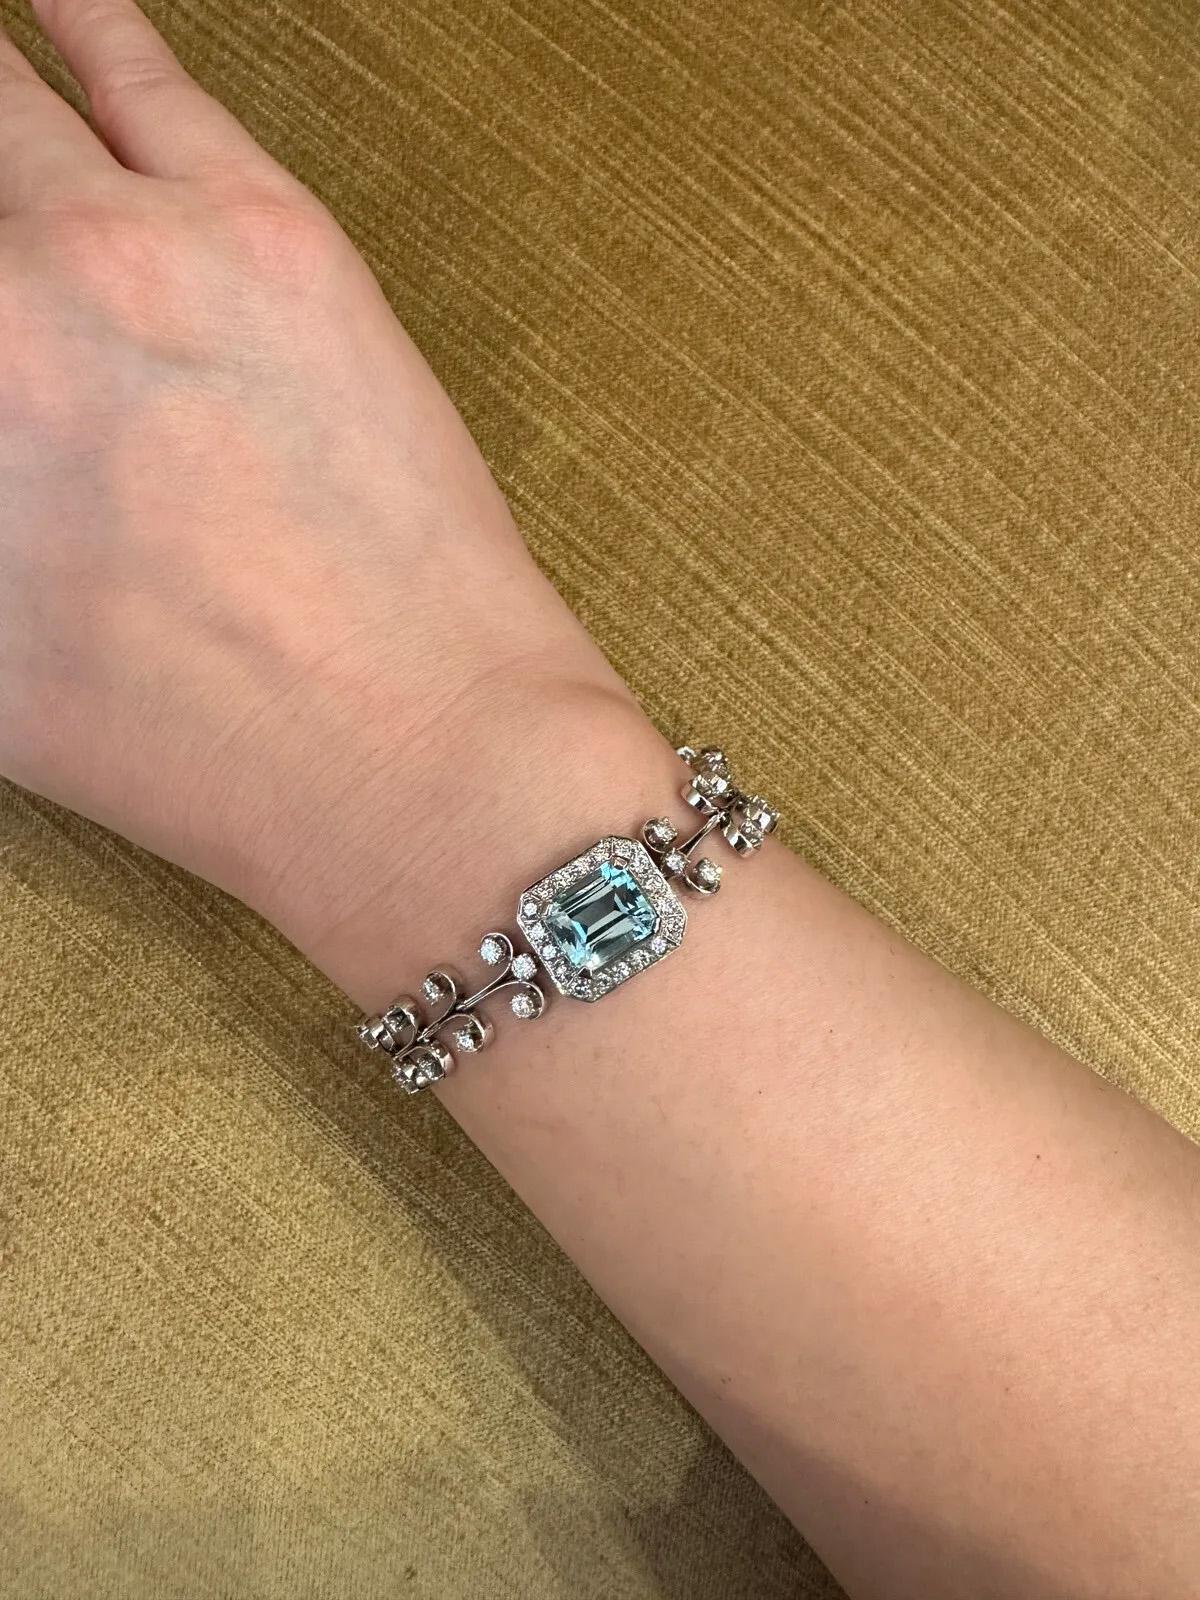 Vintage Aquamarine & Diamond Bracelet in Platinum 7.5 inches 

Vintage Aquamarine & Diamond Bracelet features rounded T shaped links with 2 Round Brilliant Diamonds each and a centerpiece light blue Emerald cut Aquamarine surrounded by Round